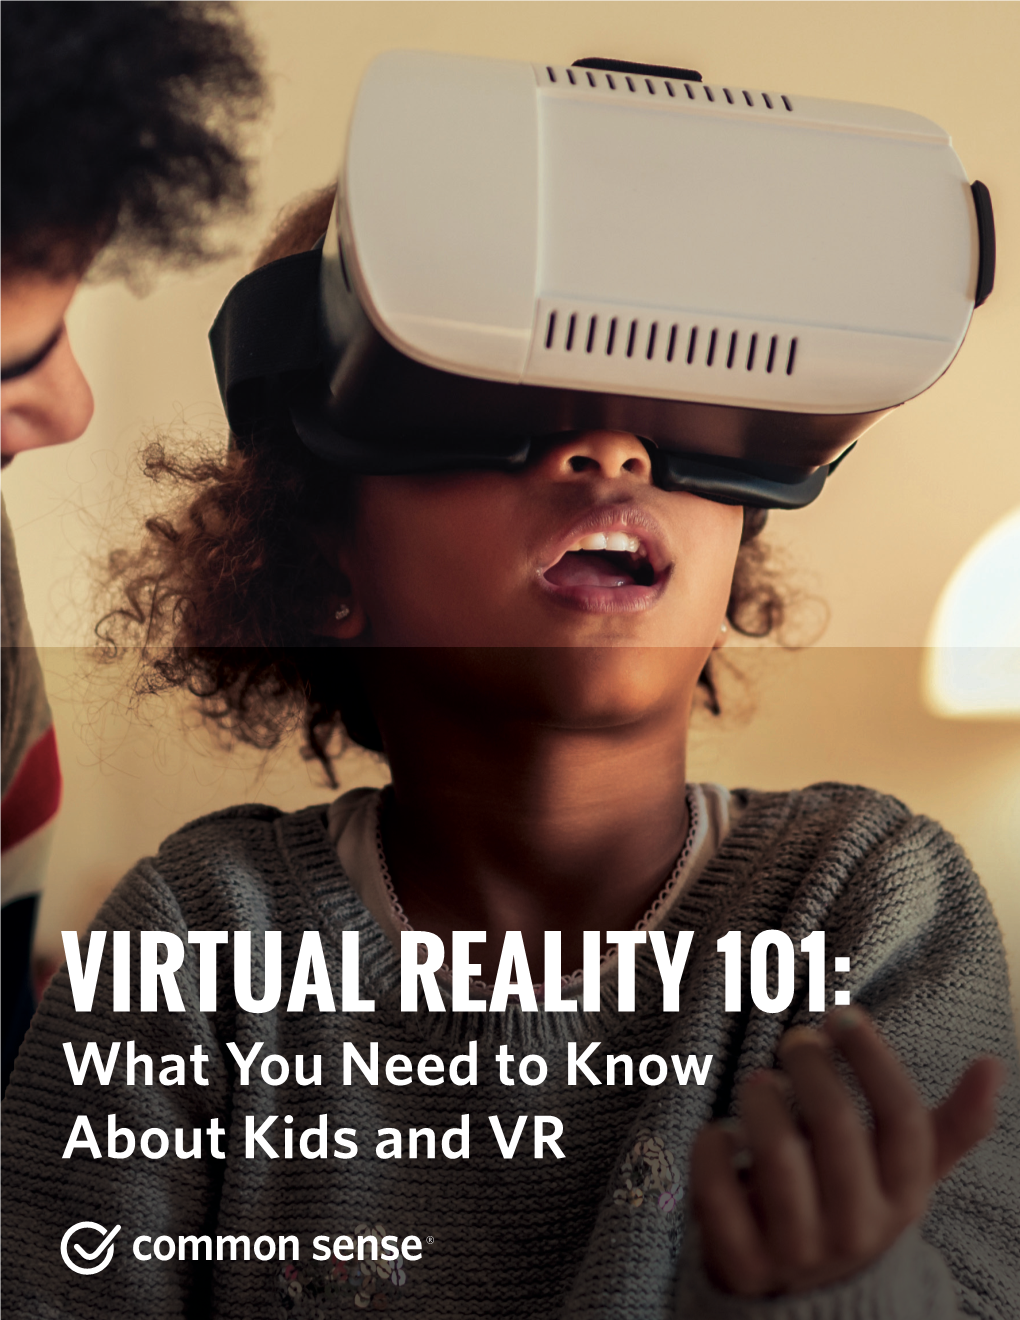 VIRTUAL REALITY 101: What You Need to Know About Kids and VR a LETTER from OUR FOUNDER